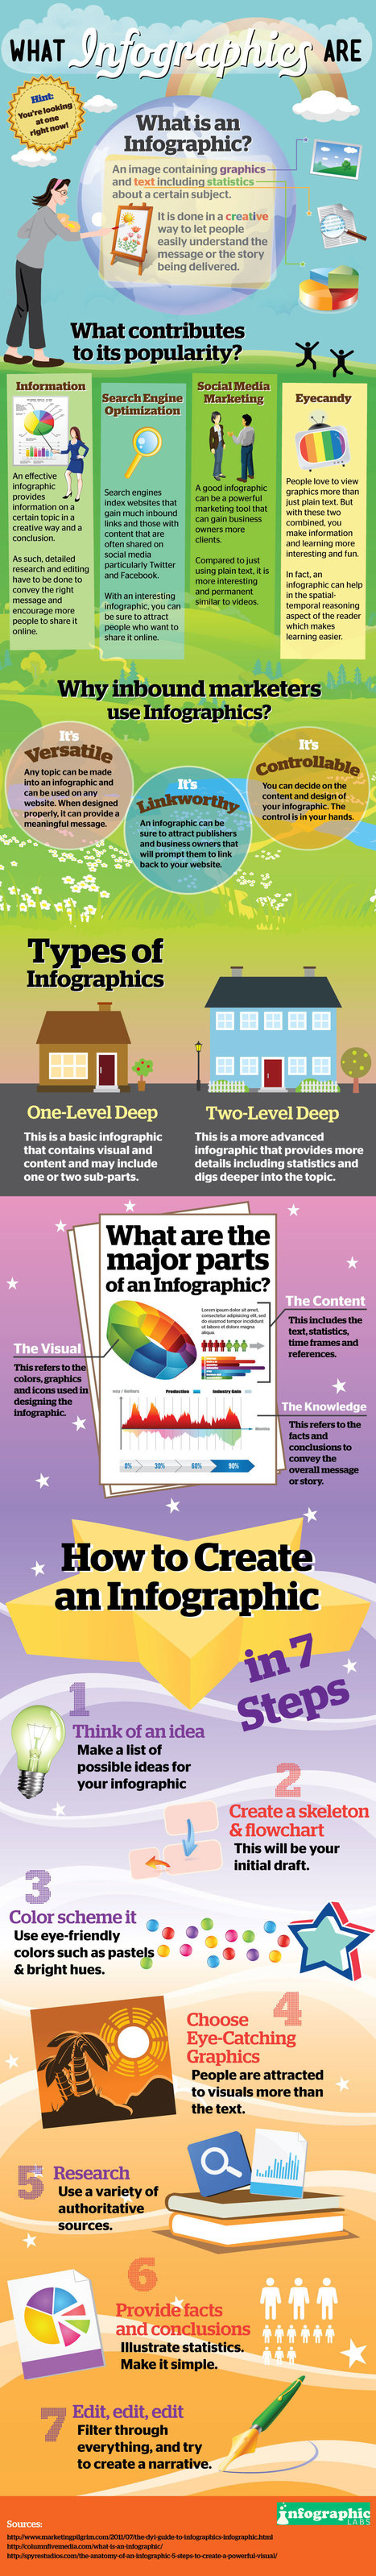 How To Create Your Own Infographics In 7 Steps [Infographic] | digital marketing strategy | Scoop.it